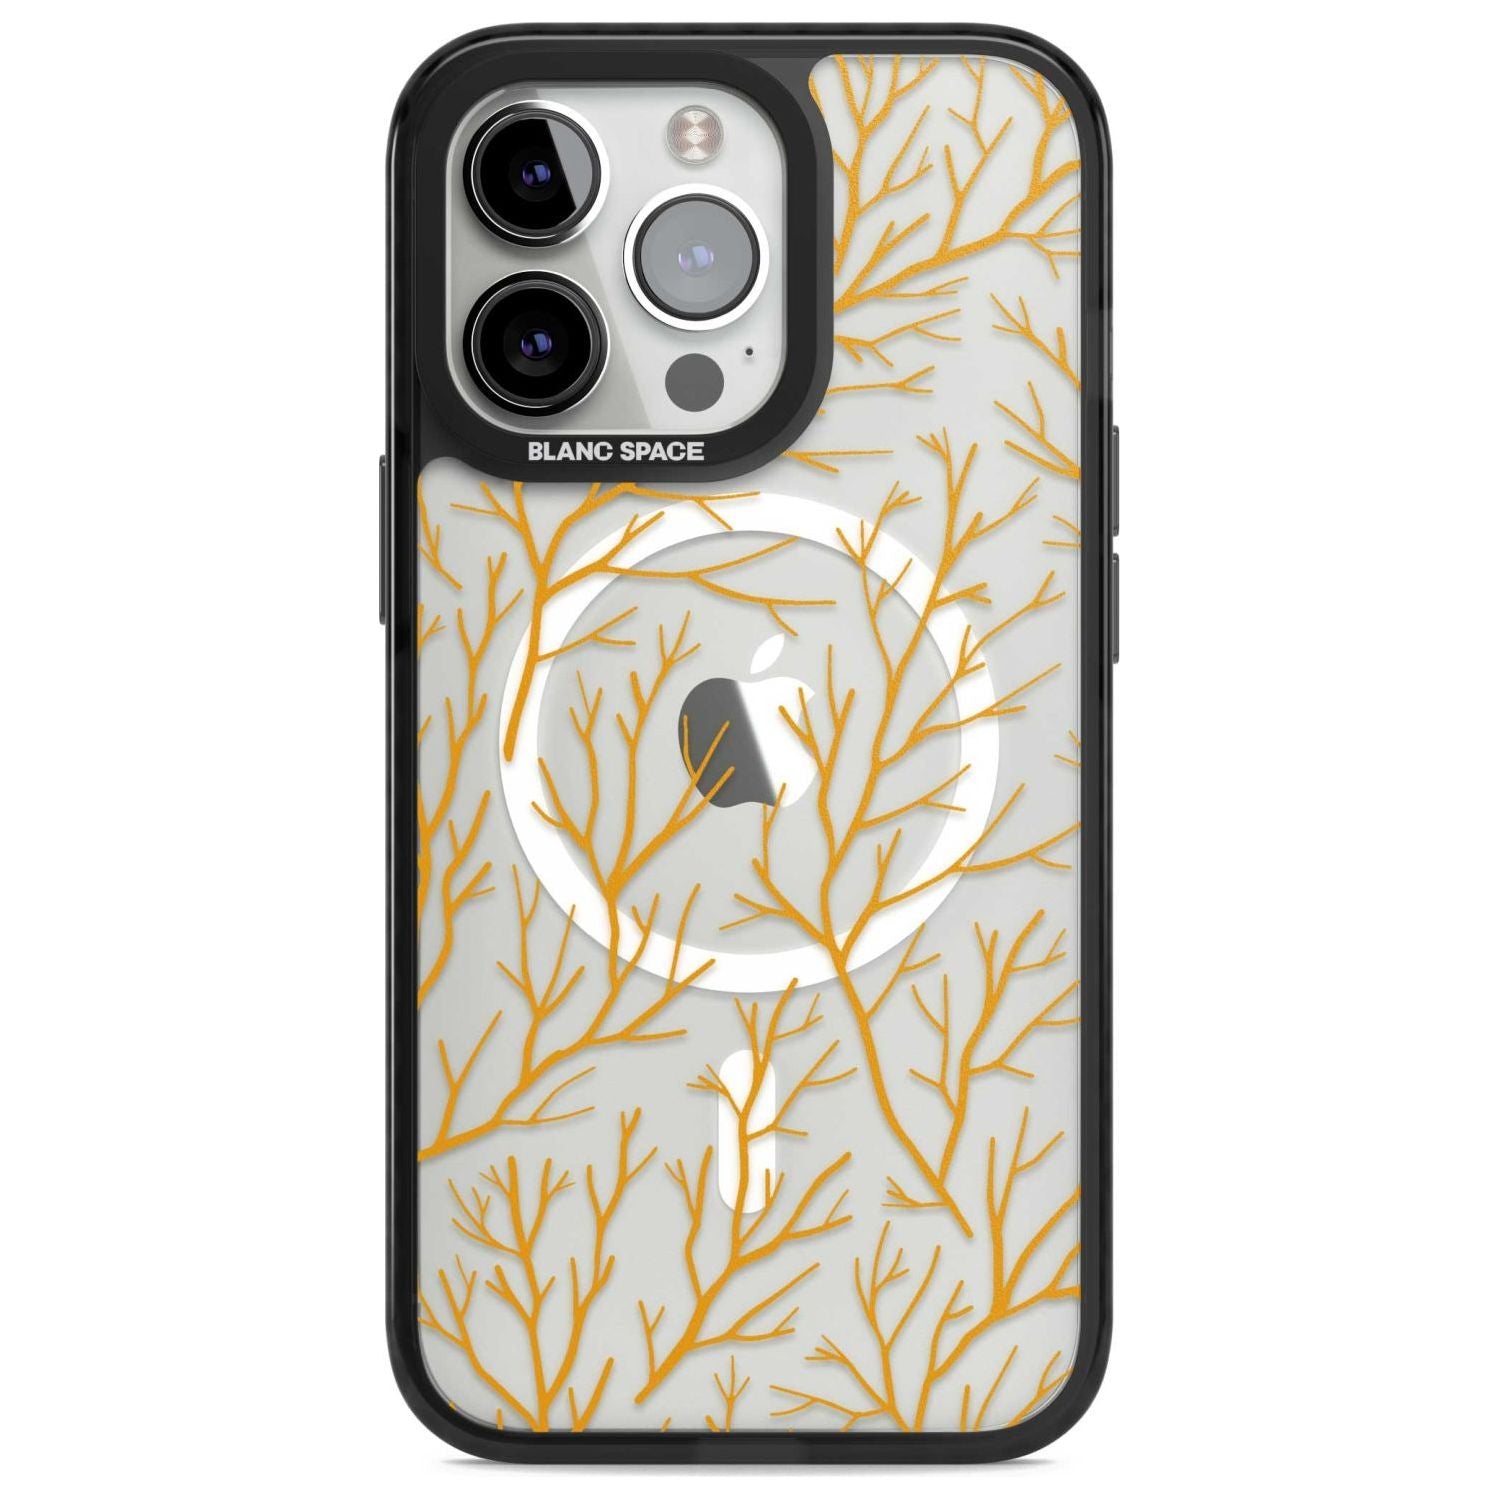 Personalised Bramble Branches Pattern Custom Phone Case iPhone 15 Pro Max / Magsafe Black Impact Case,iPhone 15 Pro / Magsafe Black Impact Case,iPhone 14 Pro Max / Magsafe Black Impact Case,iPhone 14 Pro / Magsafe Black Impact Case,iPhone 13 Pro / Magsafe Black Impact Case Blanc Space